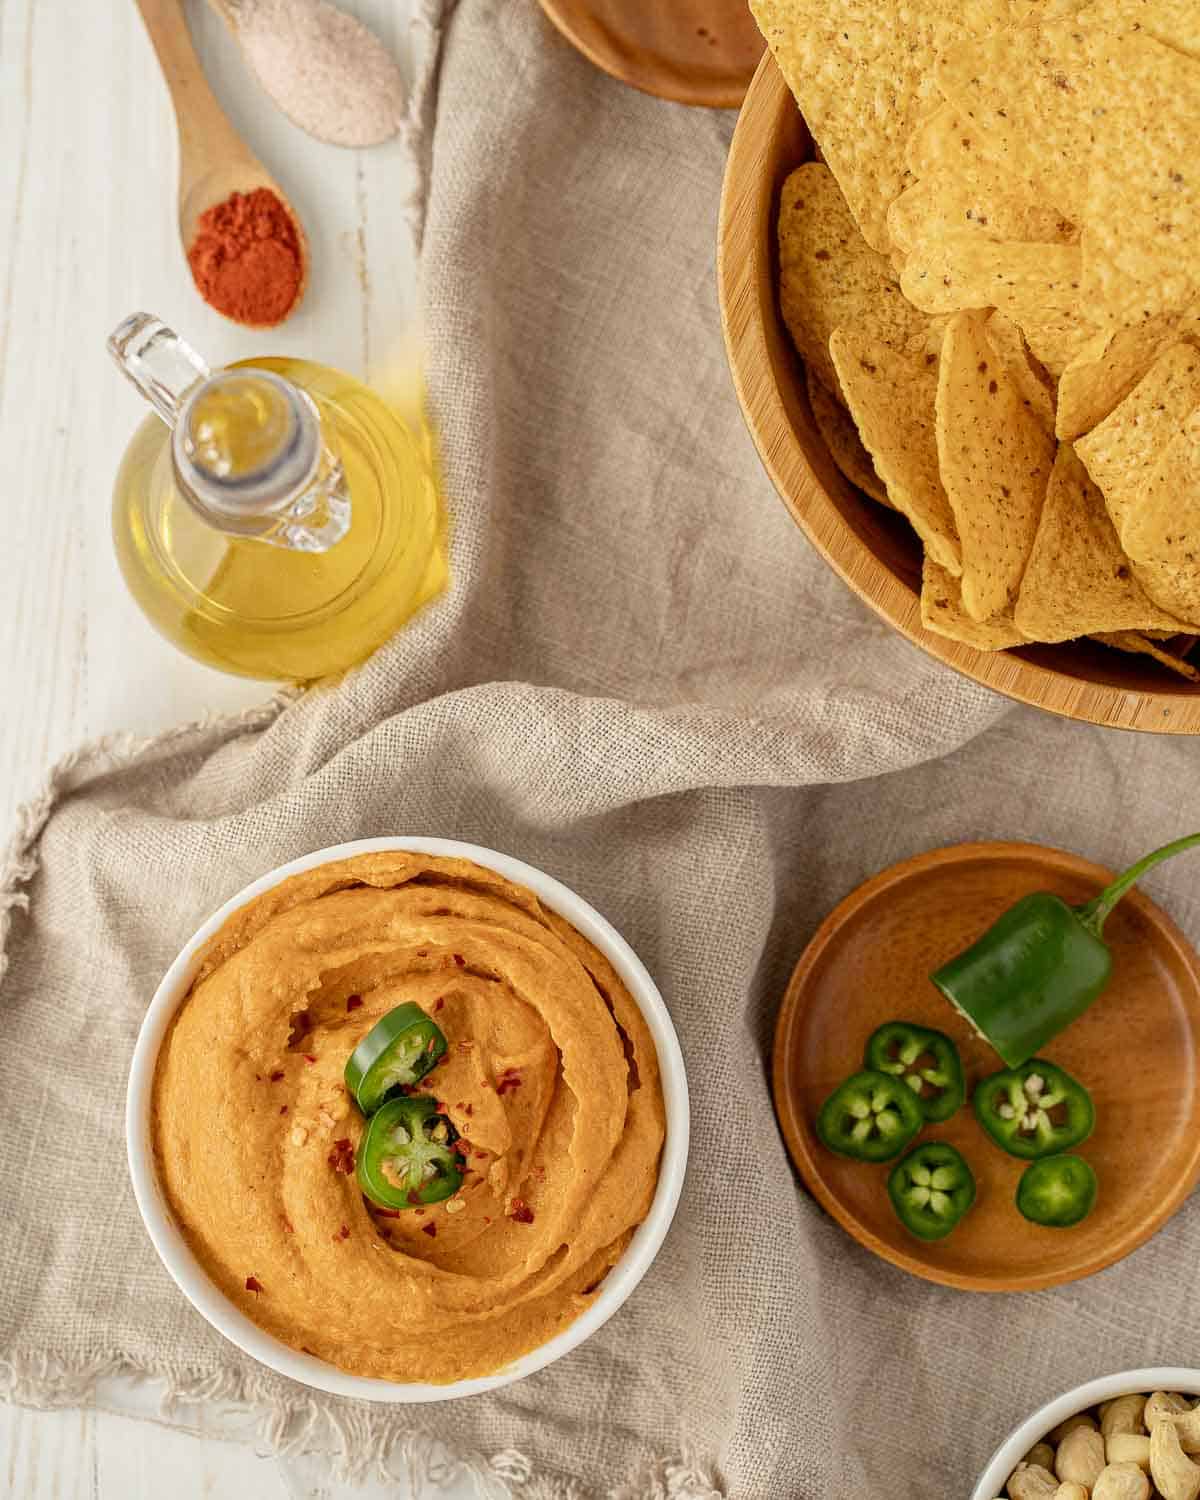 Vegan queso dip and chips spread.